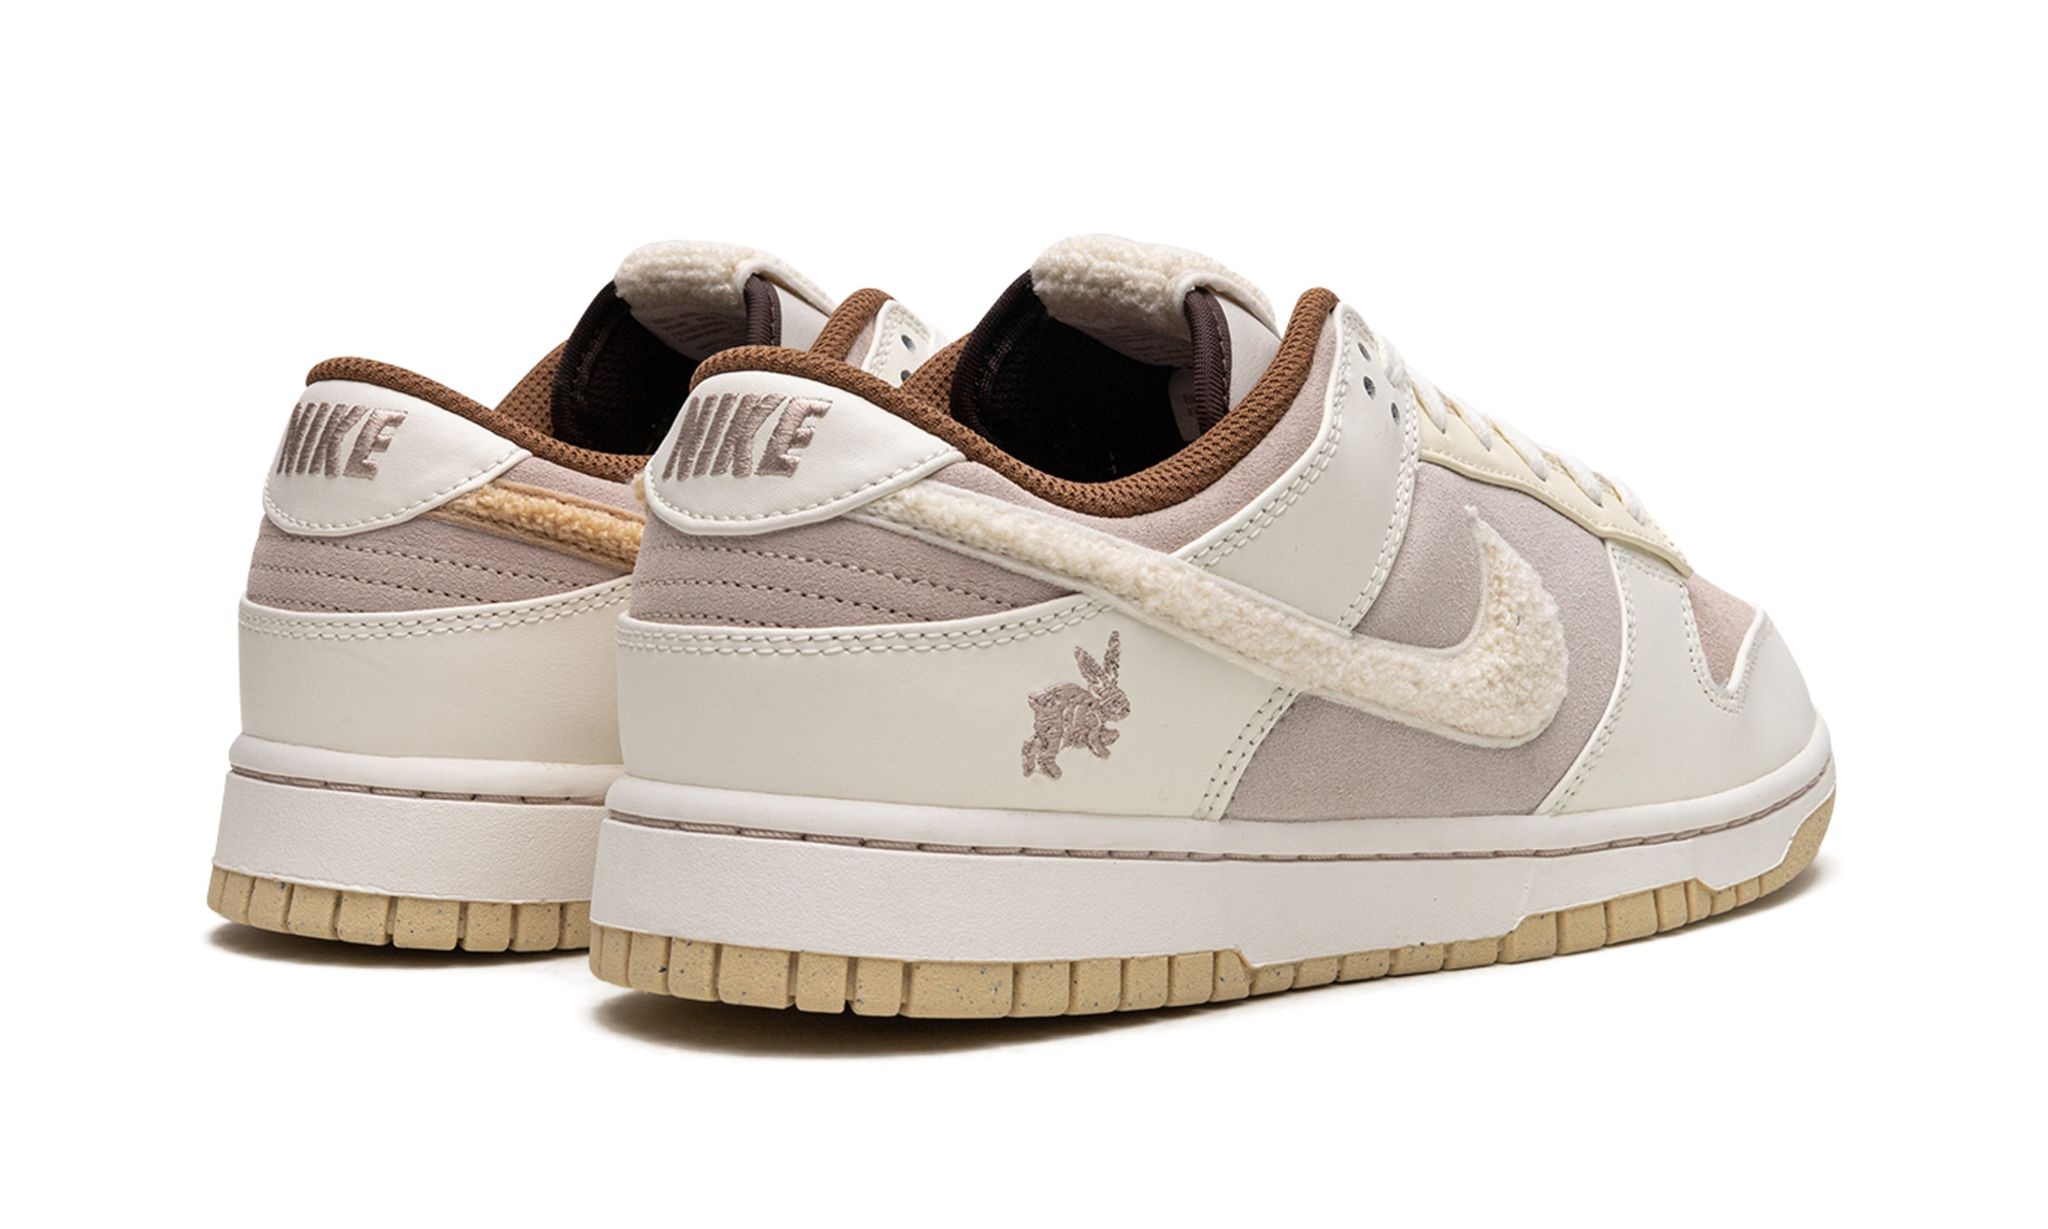 Dunk Low Retro PRM "Year of the Rabbit" - 3